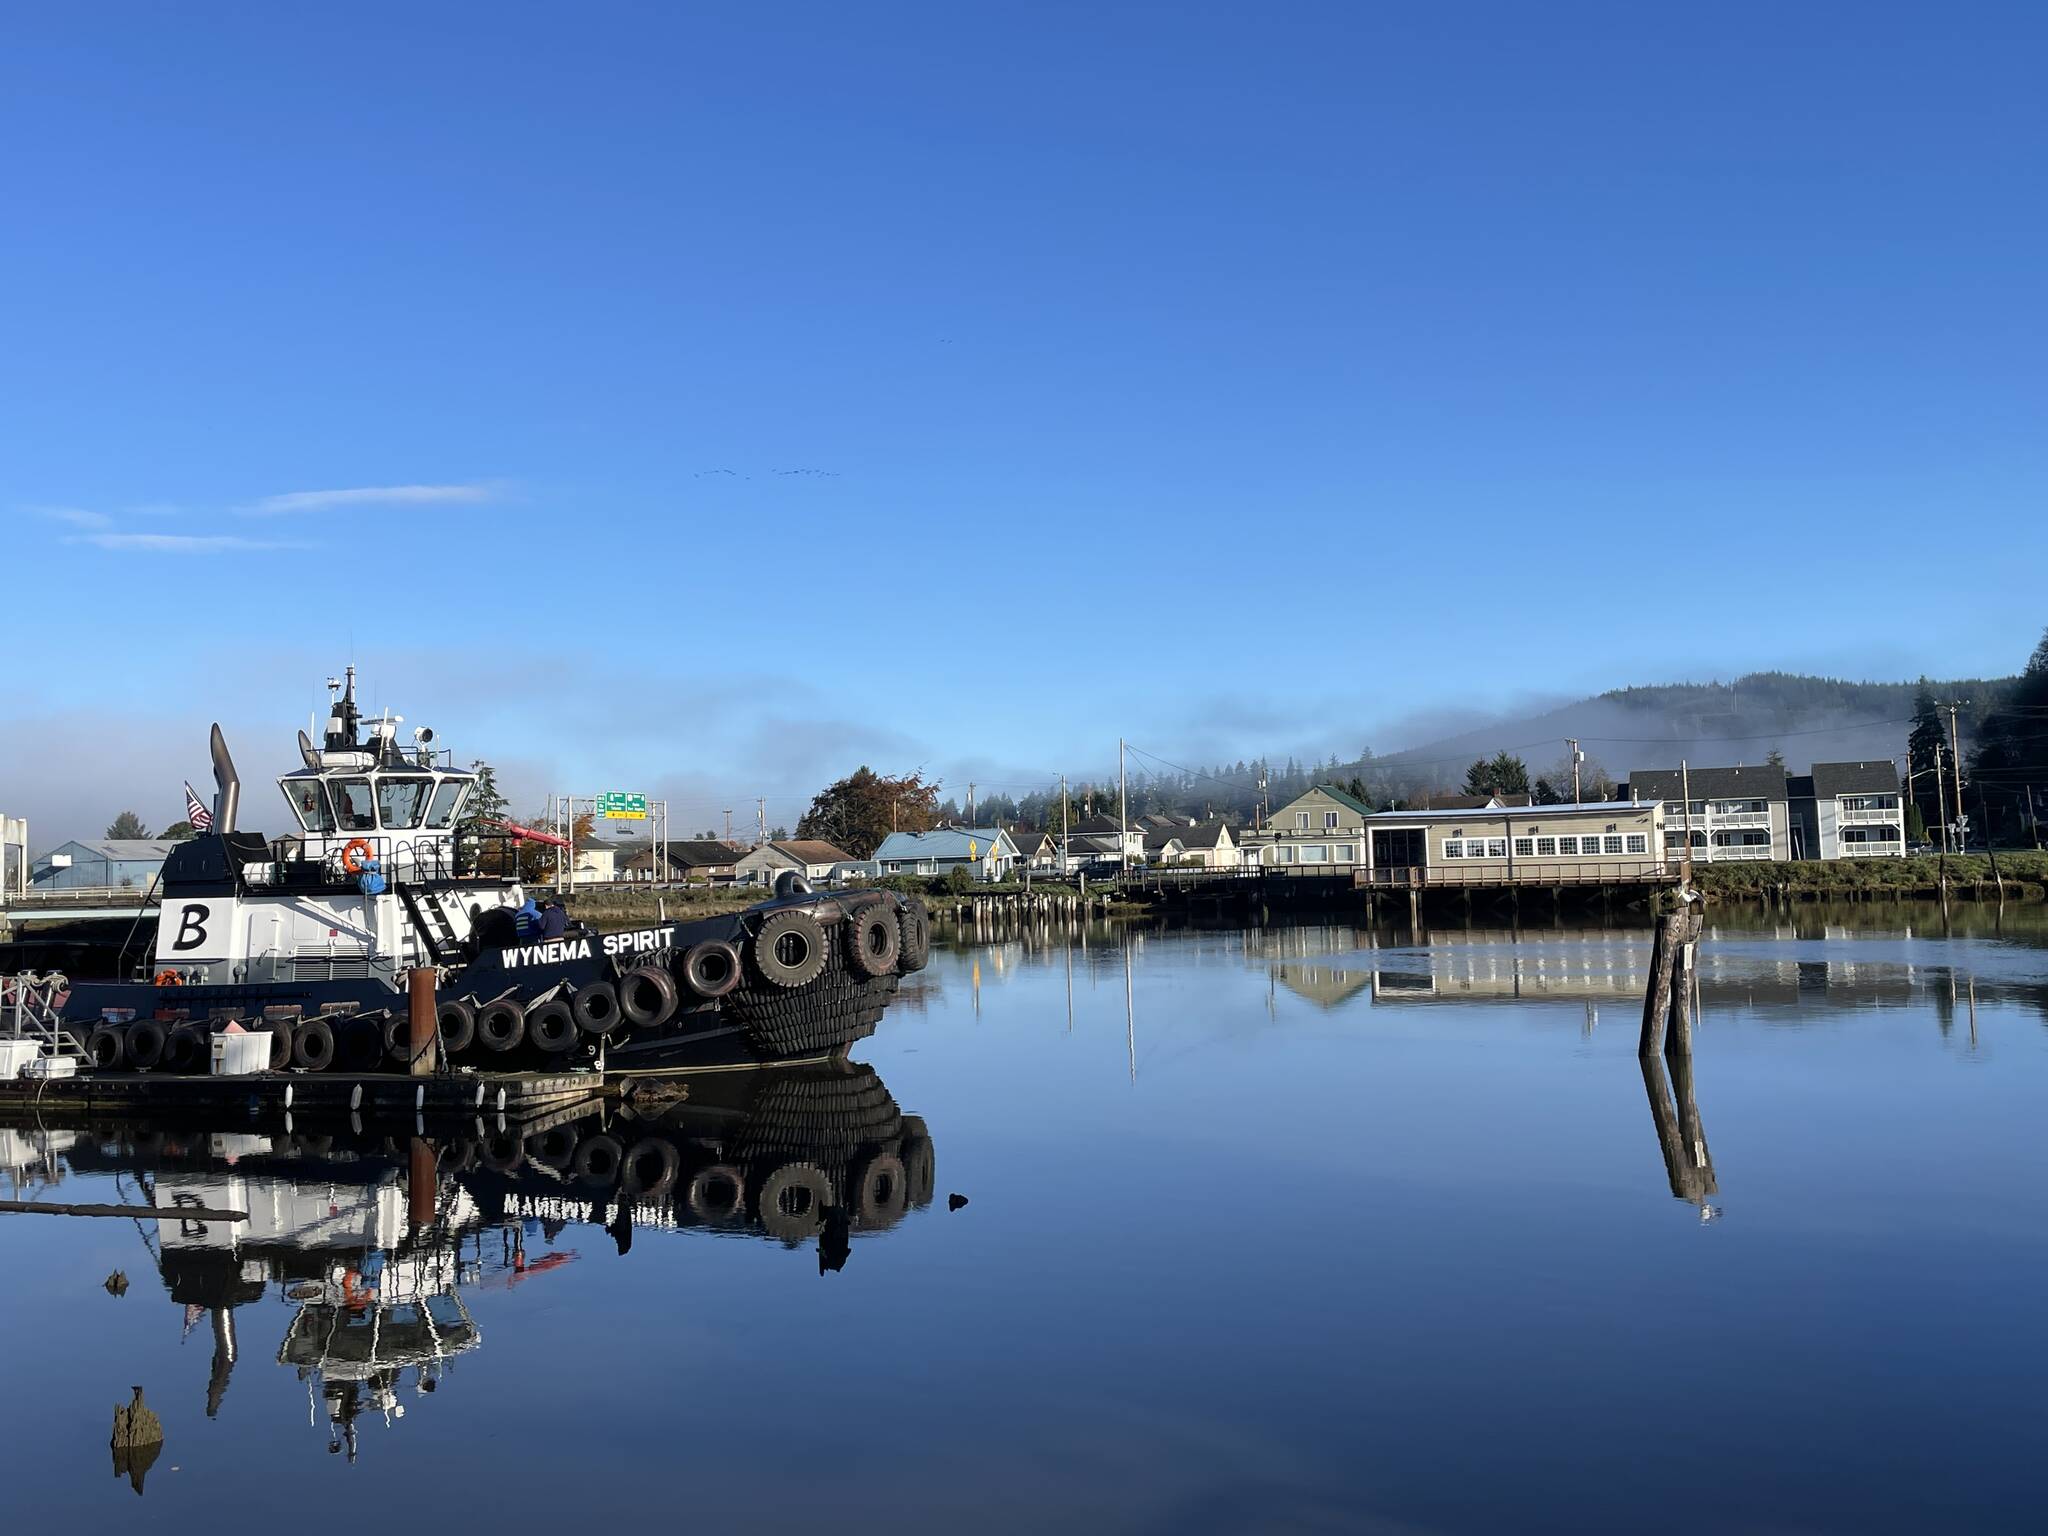 A woman was rescued from near the tugboat pier in Hoquiam after driving into the river on Nov. 11. (Michael S. Lockett / The Daily World)